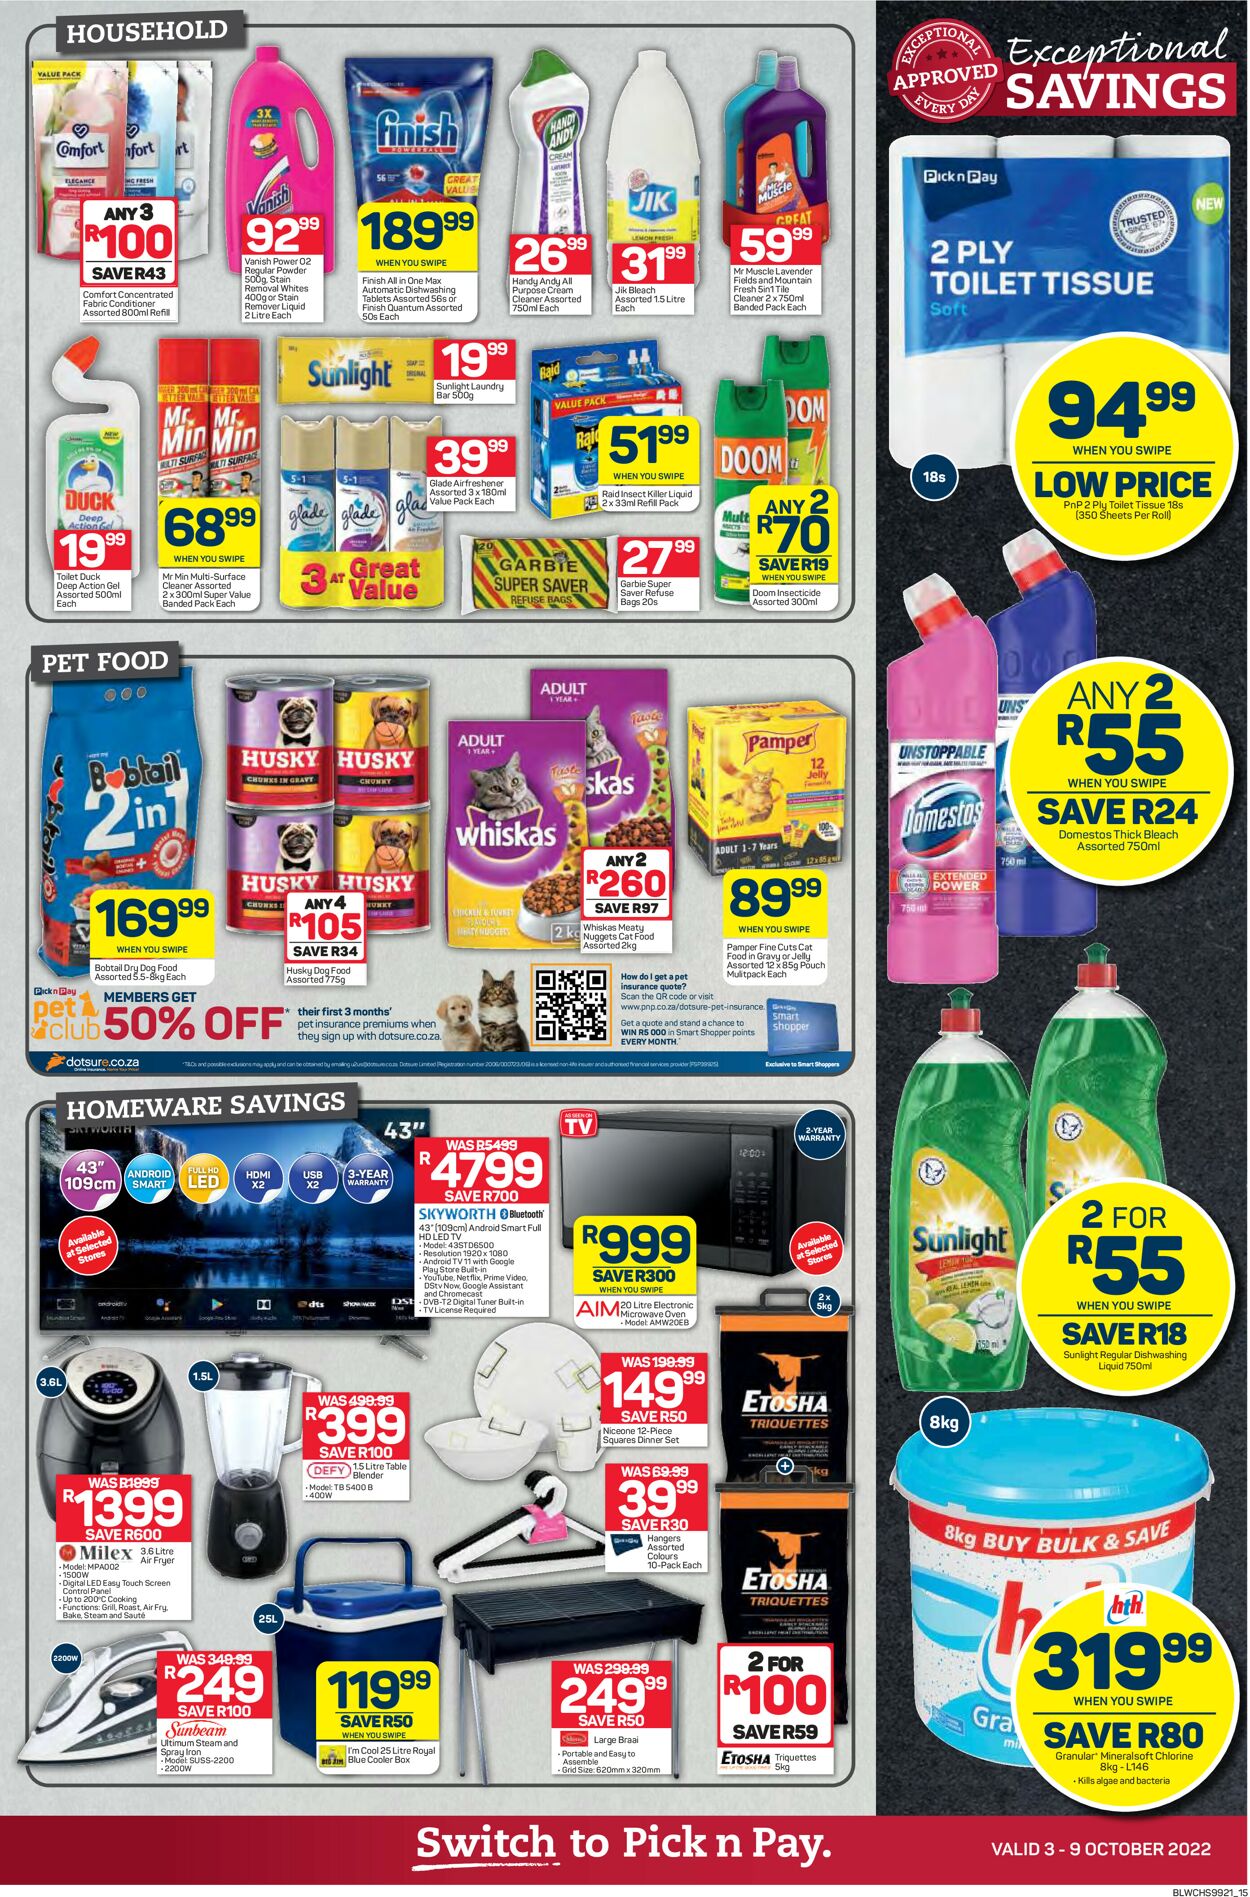 Pick n Pay Catalogue - 2022/10/03-2022/10/09 (Page 16)